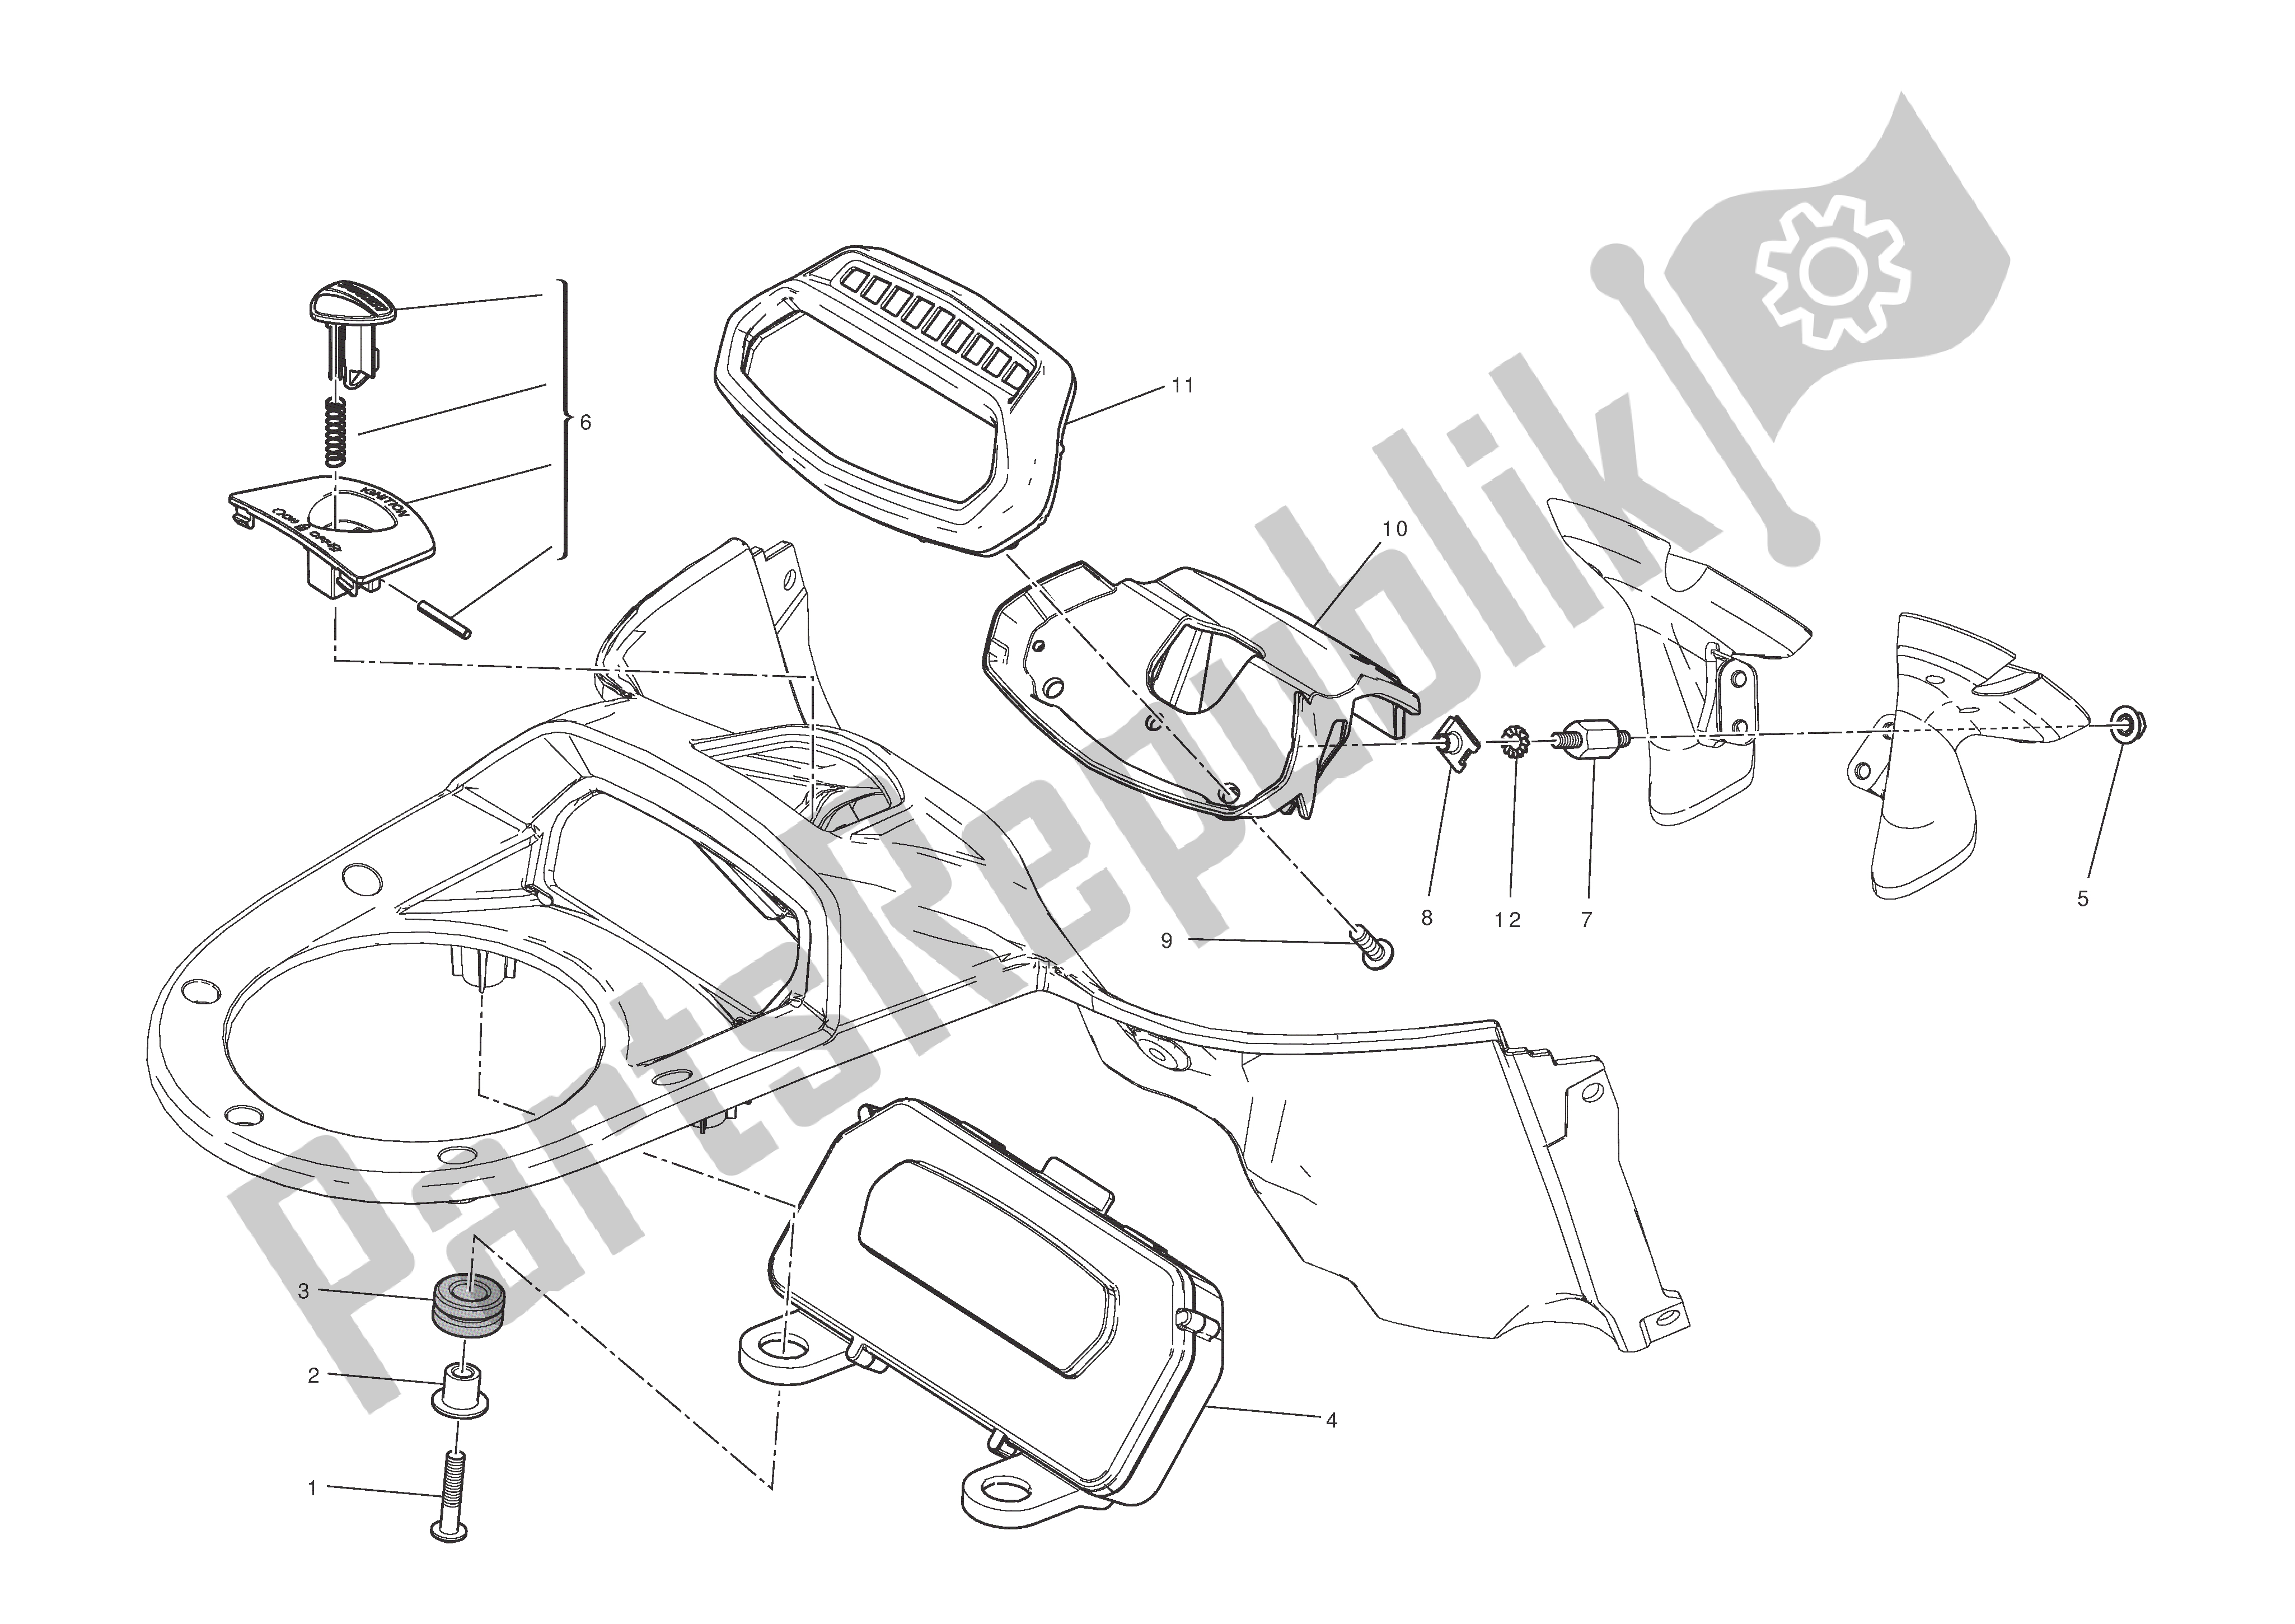 All parts for the Instrument Panel of the Ducati Diavel AMG 1200 2013